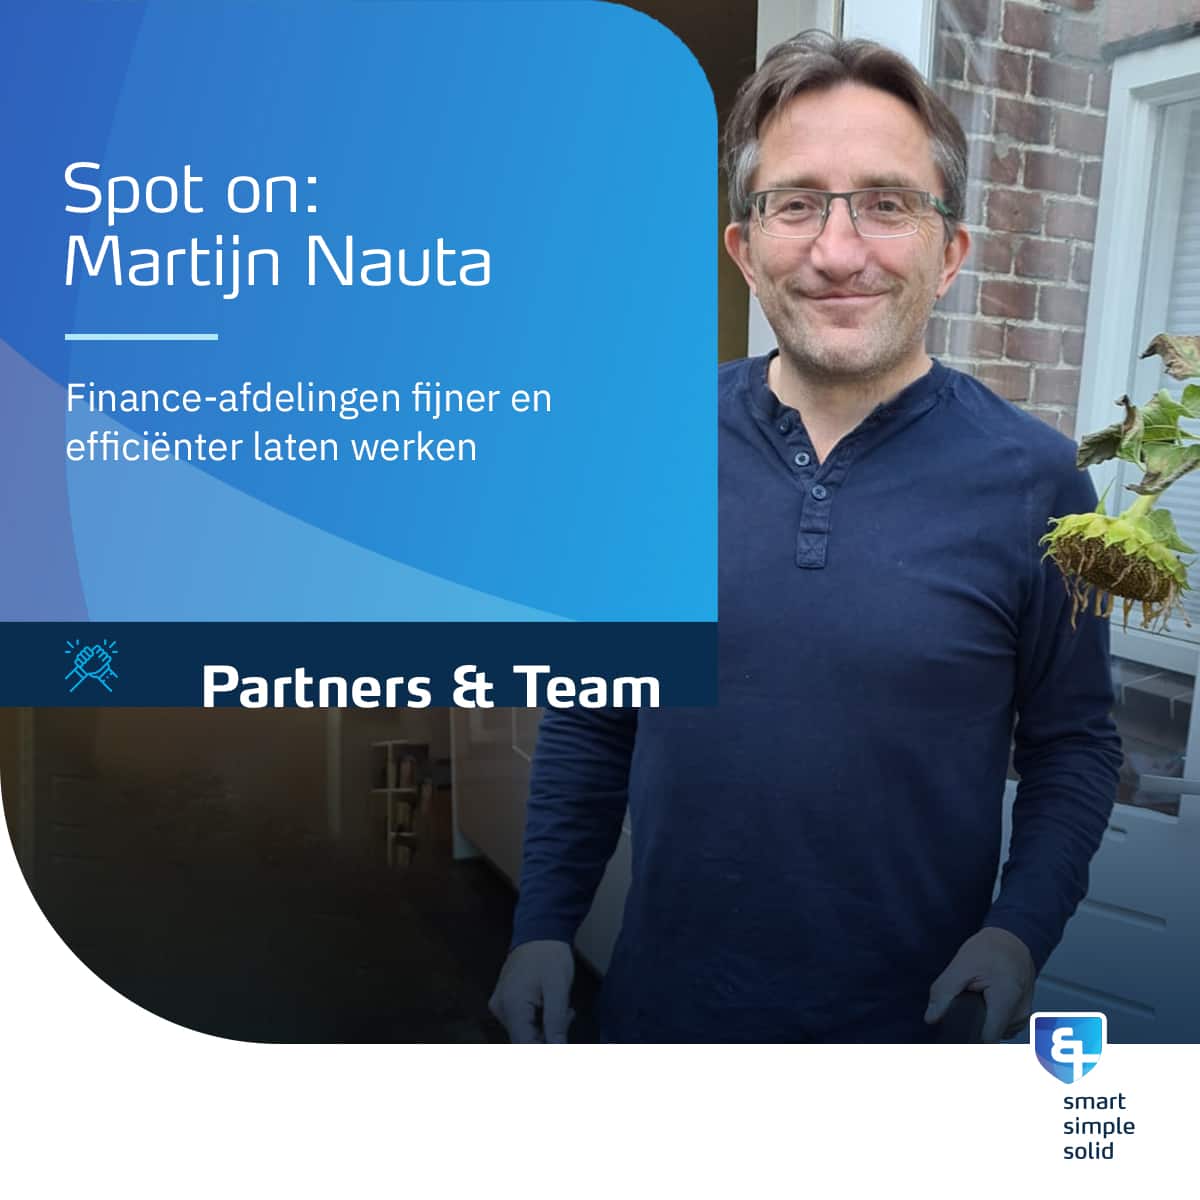 Spot on - Martijn Nauta - Making finance departments work finer and more efficiently